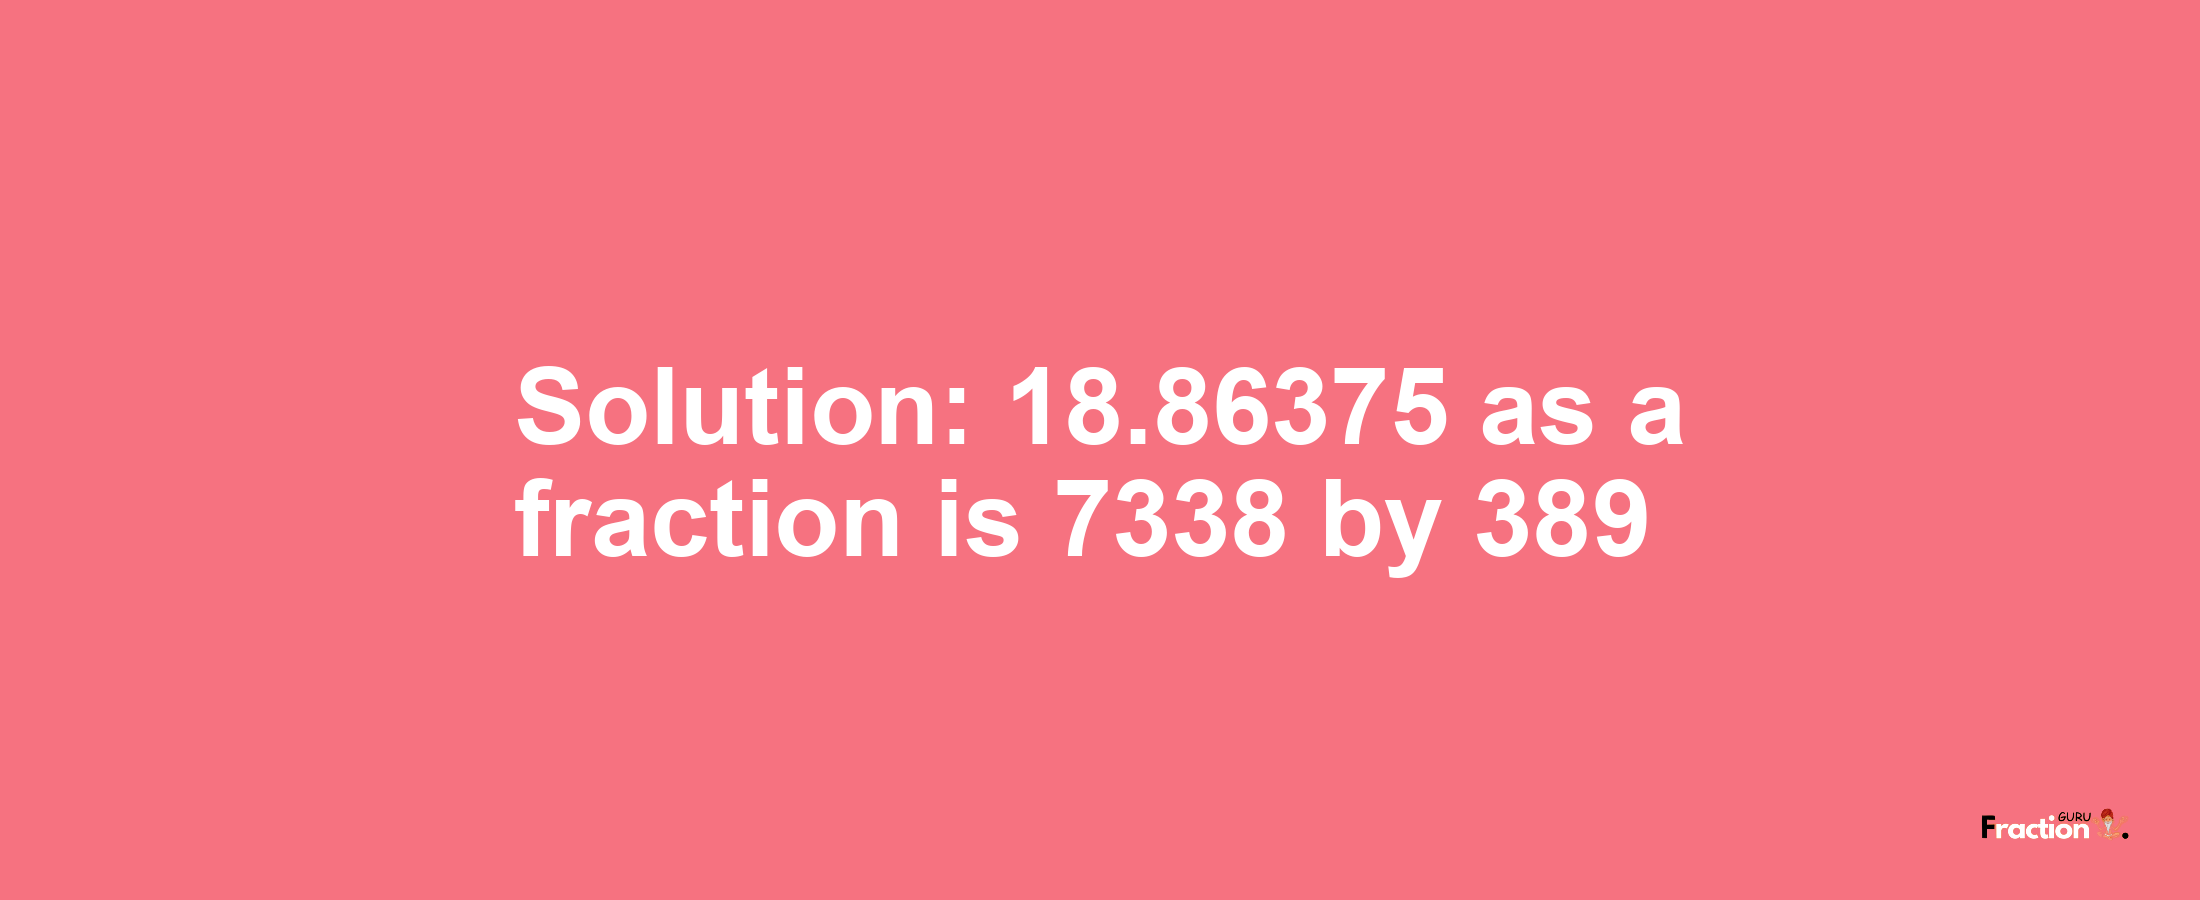 Solution:18.86375 as a fraction is 7338/389